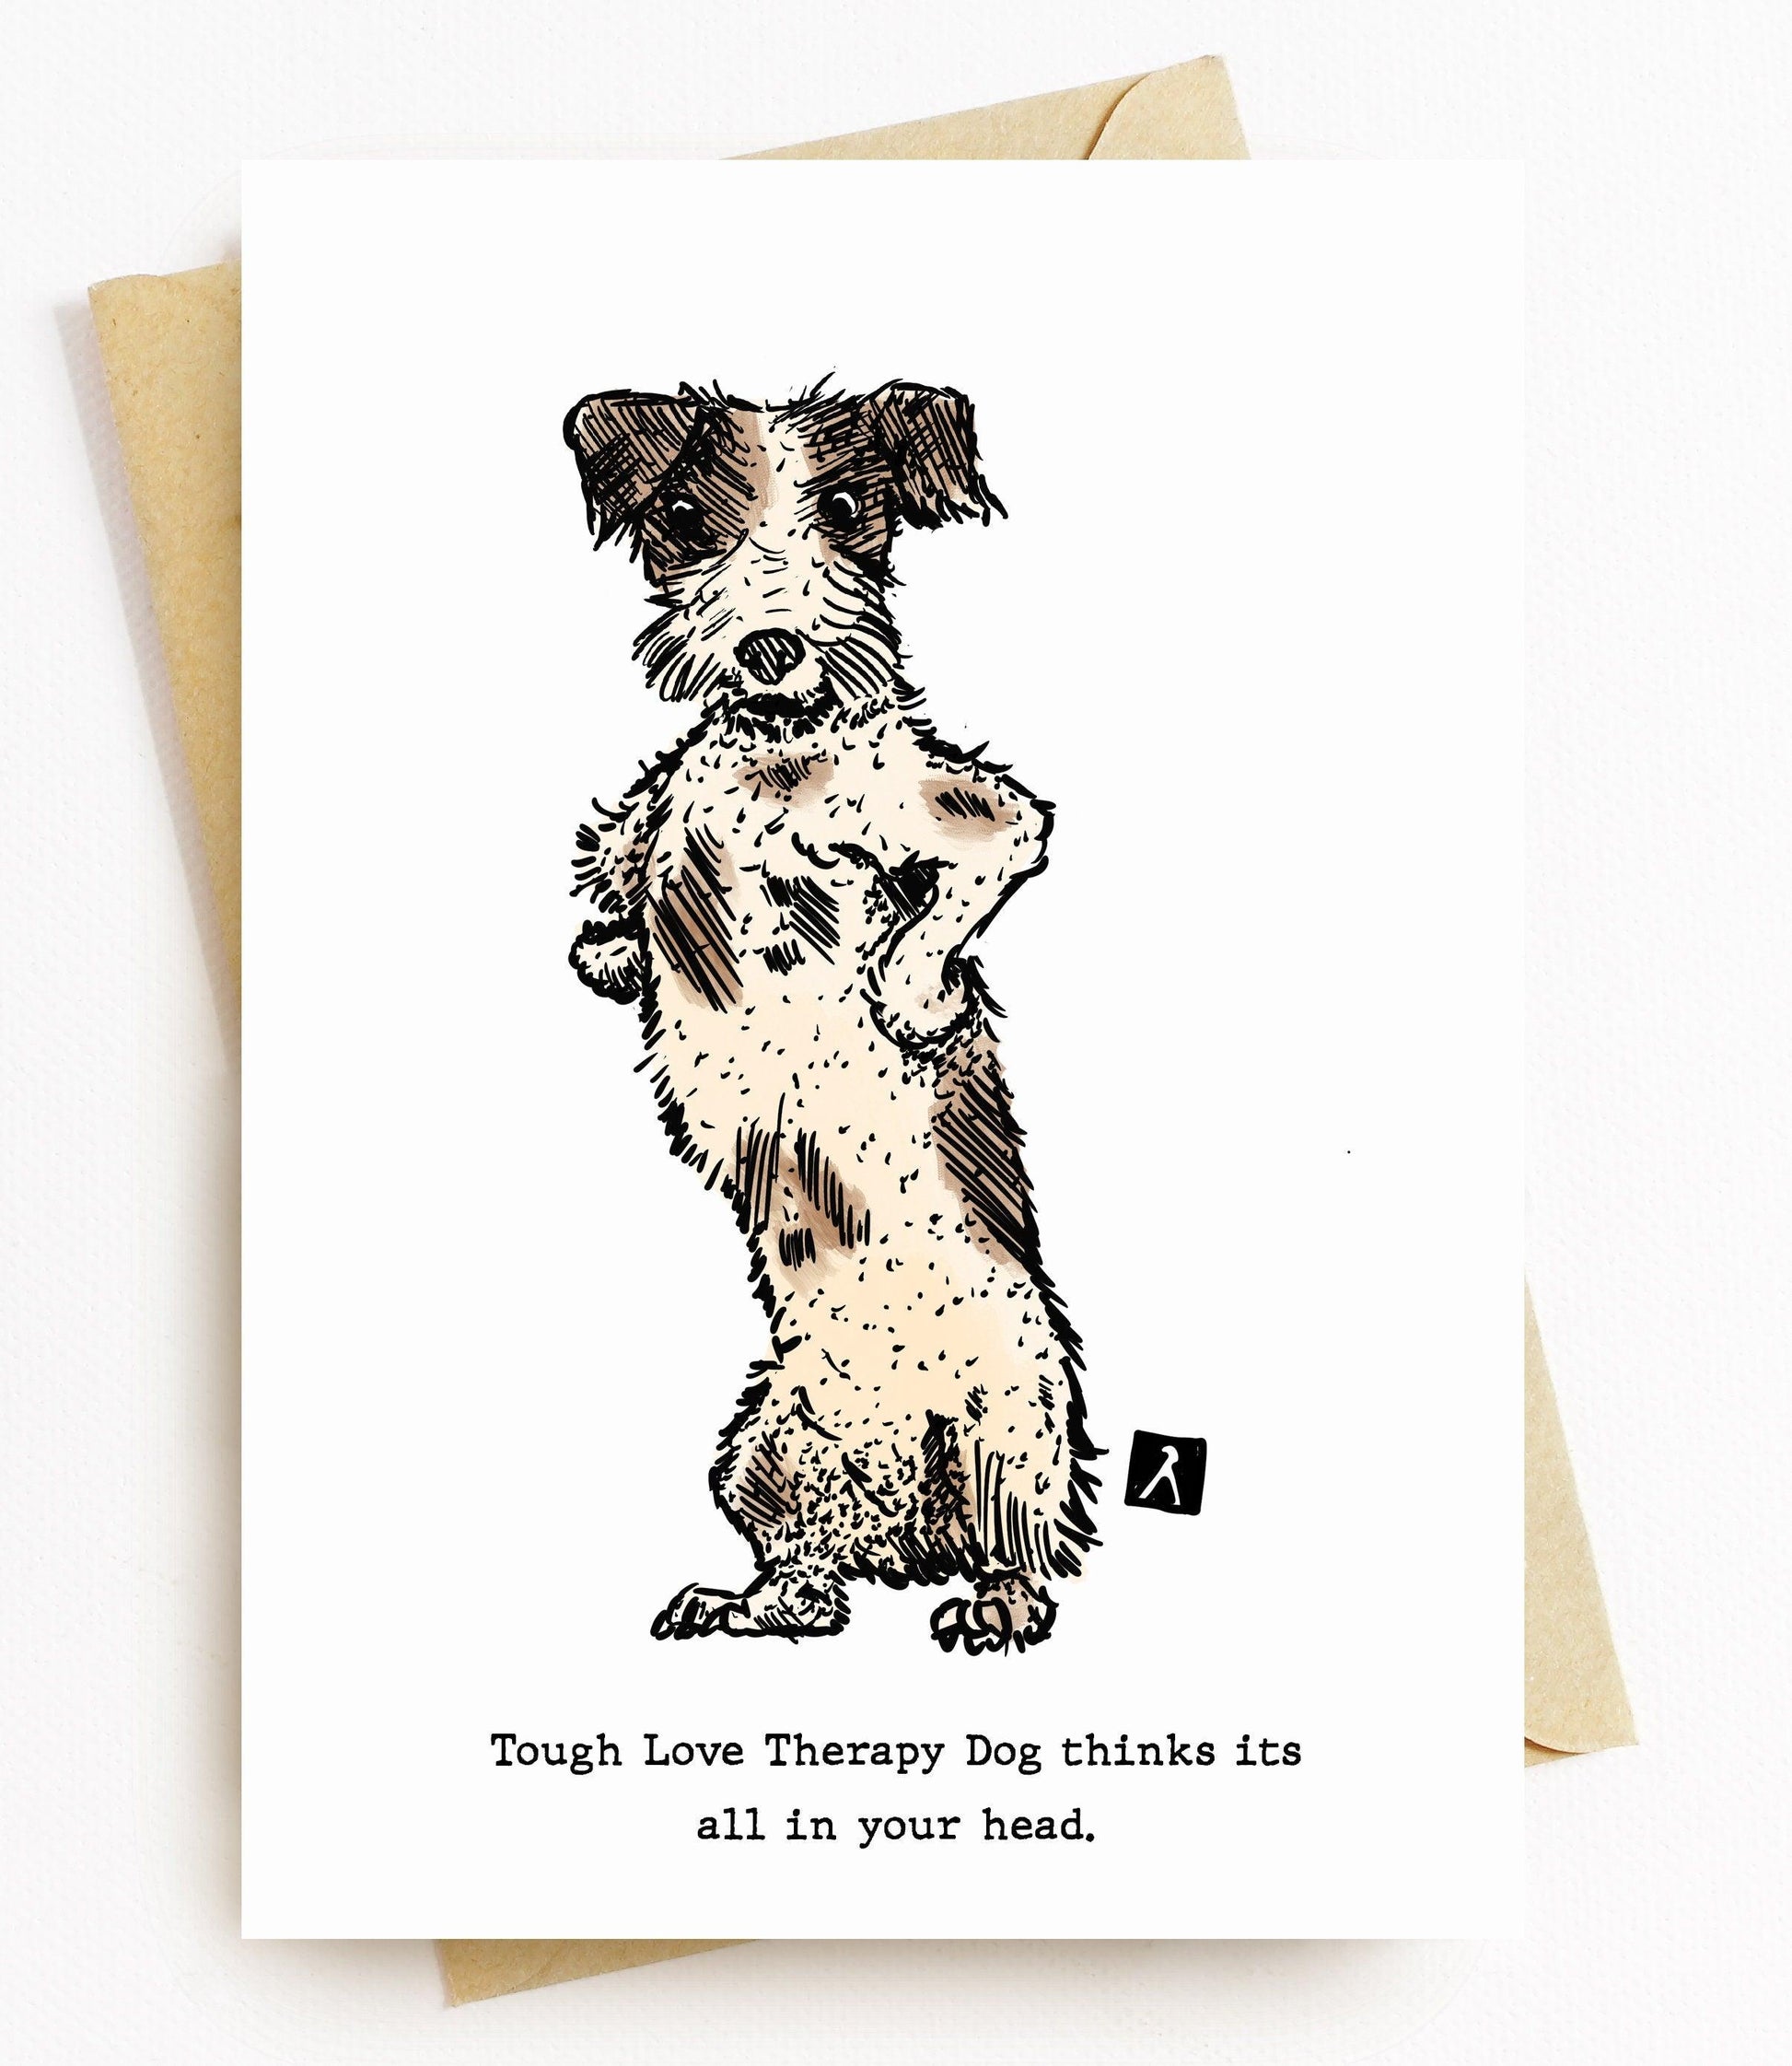 BellavanceInk: Humorous Greeting Card With Tough Love Therapy Dog's Therapy Advice 5 x 7 Inches - BellavanceInk